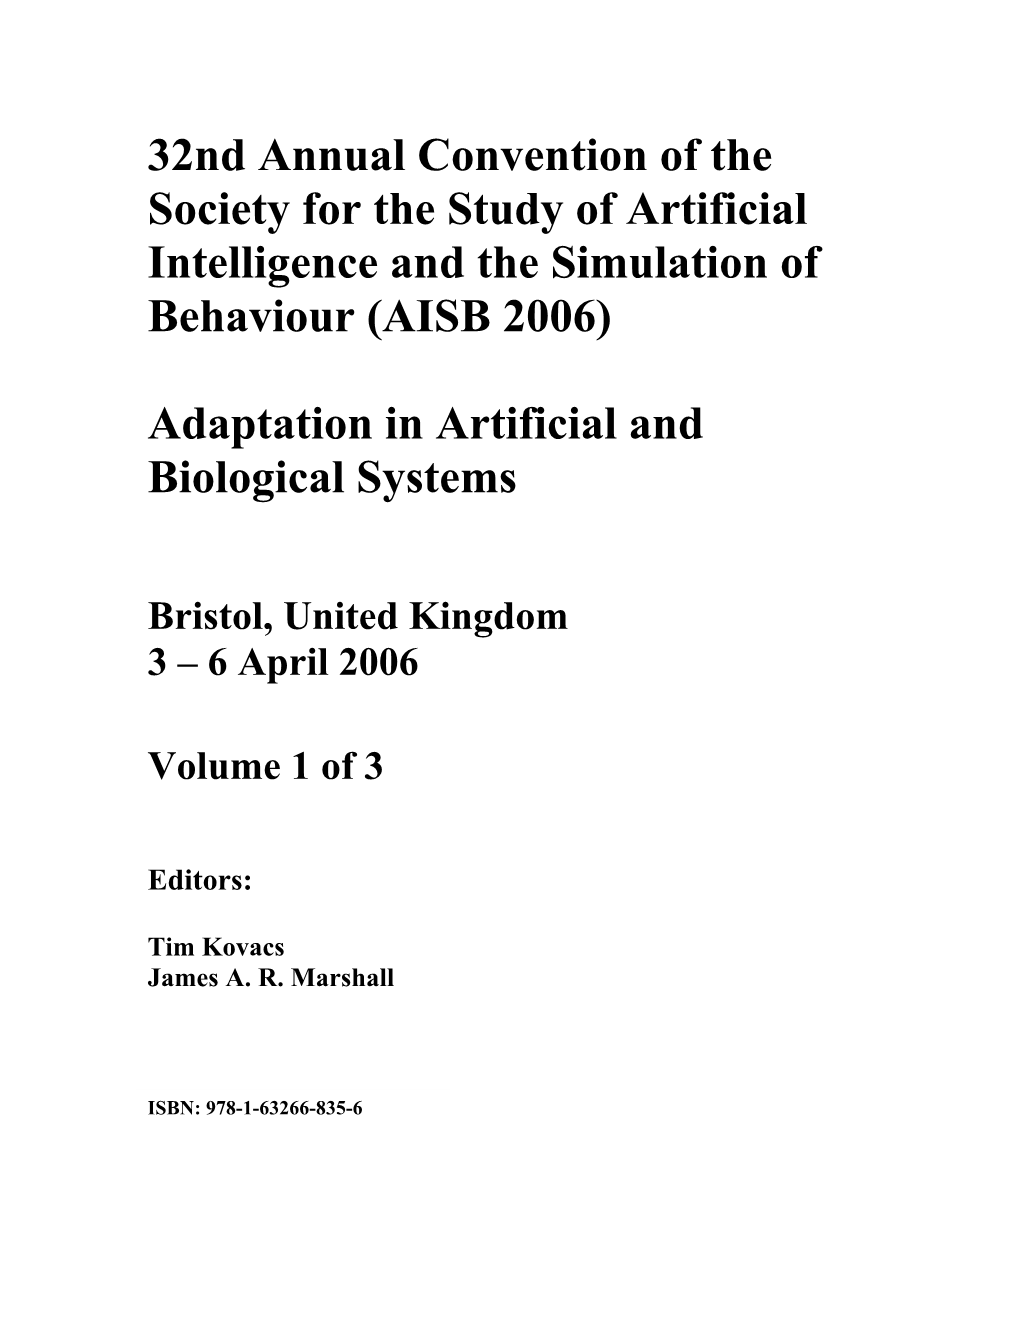 32Nd Annual Convention of the Society for the Study of Artificial Intelligence and the Simulation of Behaviour (AISB 2006)